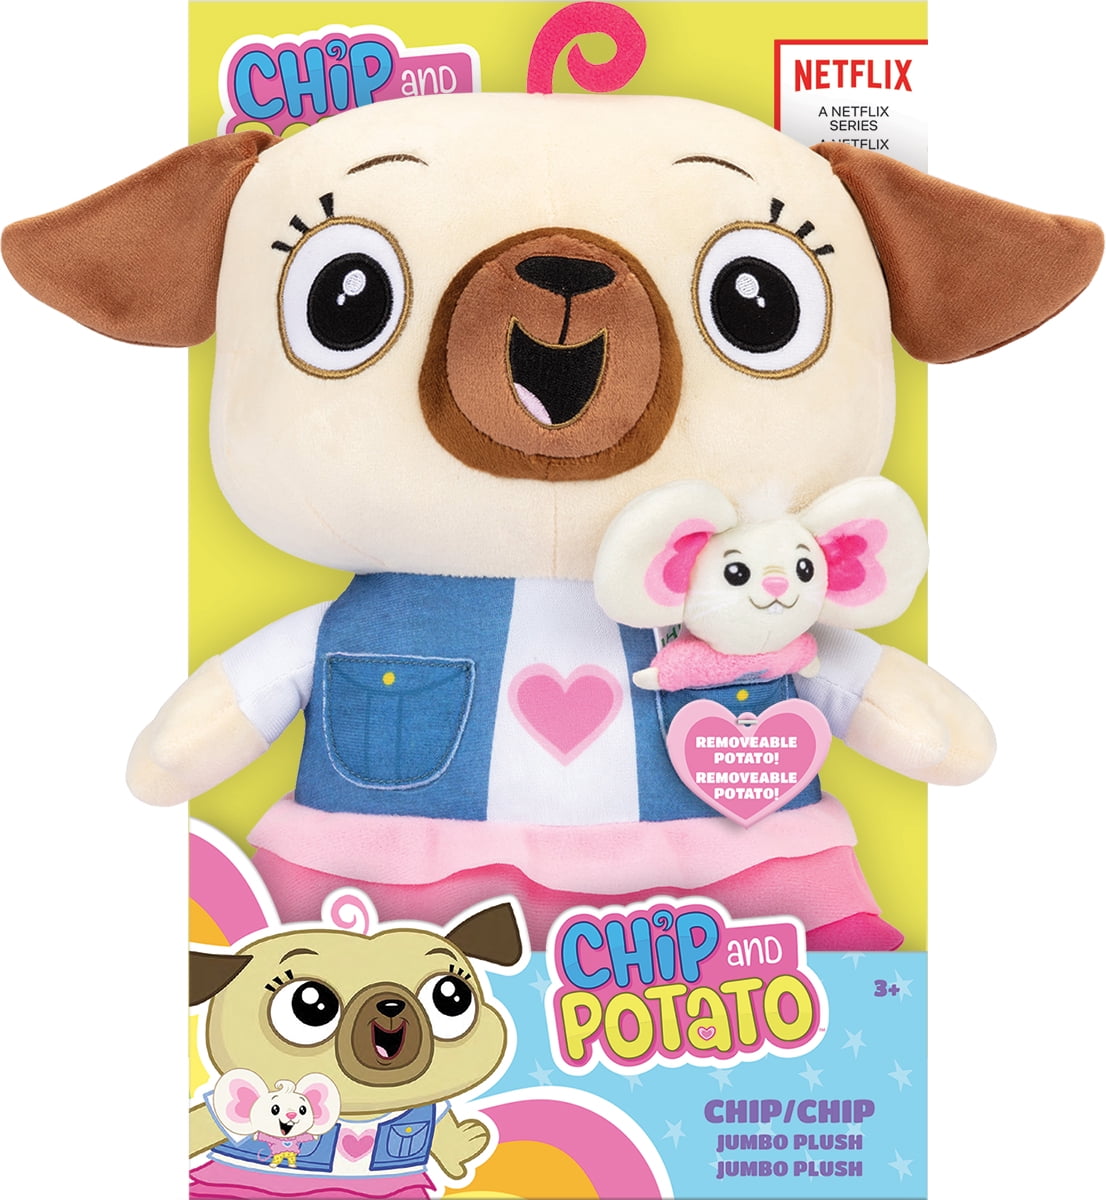 Chip and Potato Zeronic Jumbo Plush Toy, Official Licensed Stuffed Animal 12 inch Chip with Her 4 inch Removable Potato Pal!